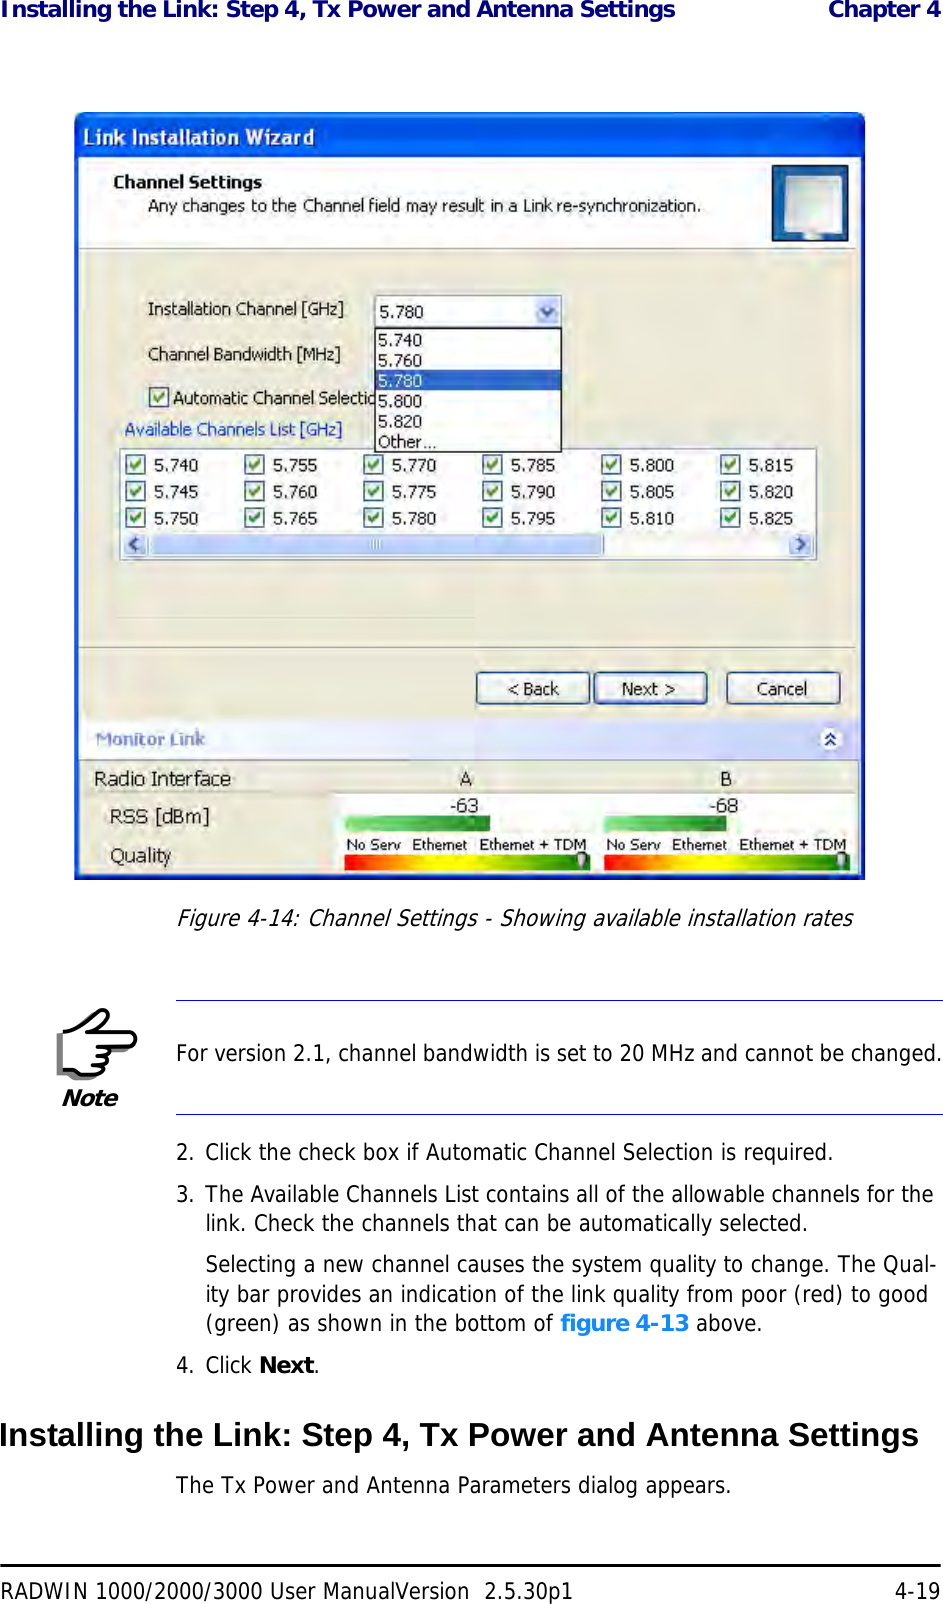 Installing the Link: Step 4, Tx Power and Antenna Settings  Chapter 4RADWIN 1000/2000/3000 User ManualVersion  2.5.30p1 4-19Figure 4-14: Channel Settings - Showing available installation rates2. Click the check box if Automatic Channel Selection is required.3. The Available Channels List contains all of the allowable channels for the link. Check the channels that can be automatically selected.Selecting a new channel causes the system quality to change. The Qual-ity bar provides an indication of the link quality from poor (red) to good (green) as shown in the bottom of figure 4-13 above.4. Click Next.Installing the Link: Step 4, Tx Power and Antenna SettingsThe Tx Power and Antenna Parameters dialog appears.NoteFor version 2.1, channel bandwidth is set to 20 MHz and cannot be changed.